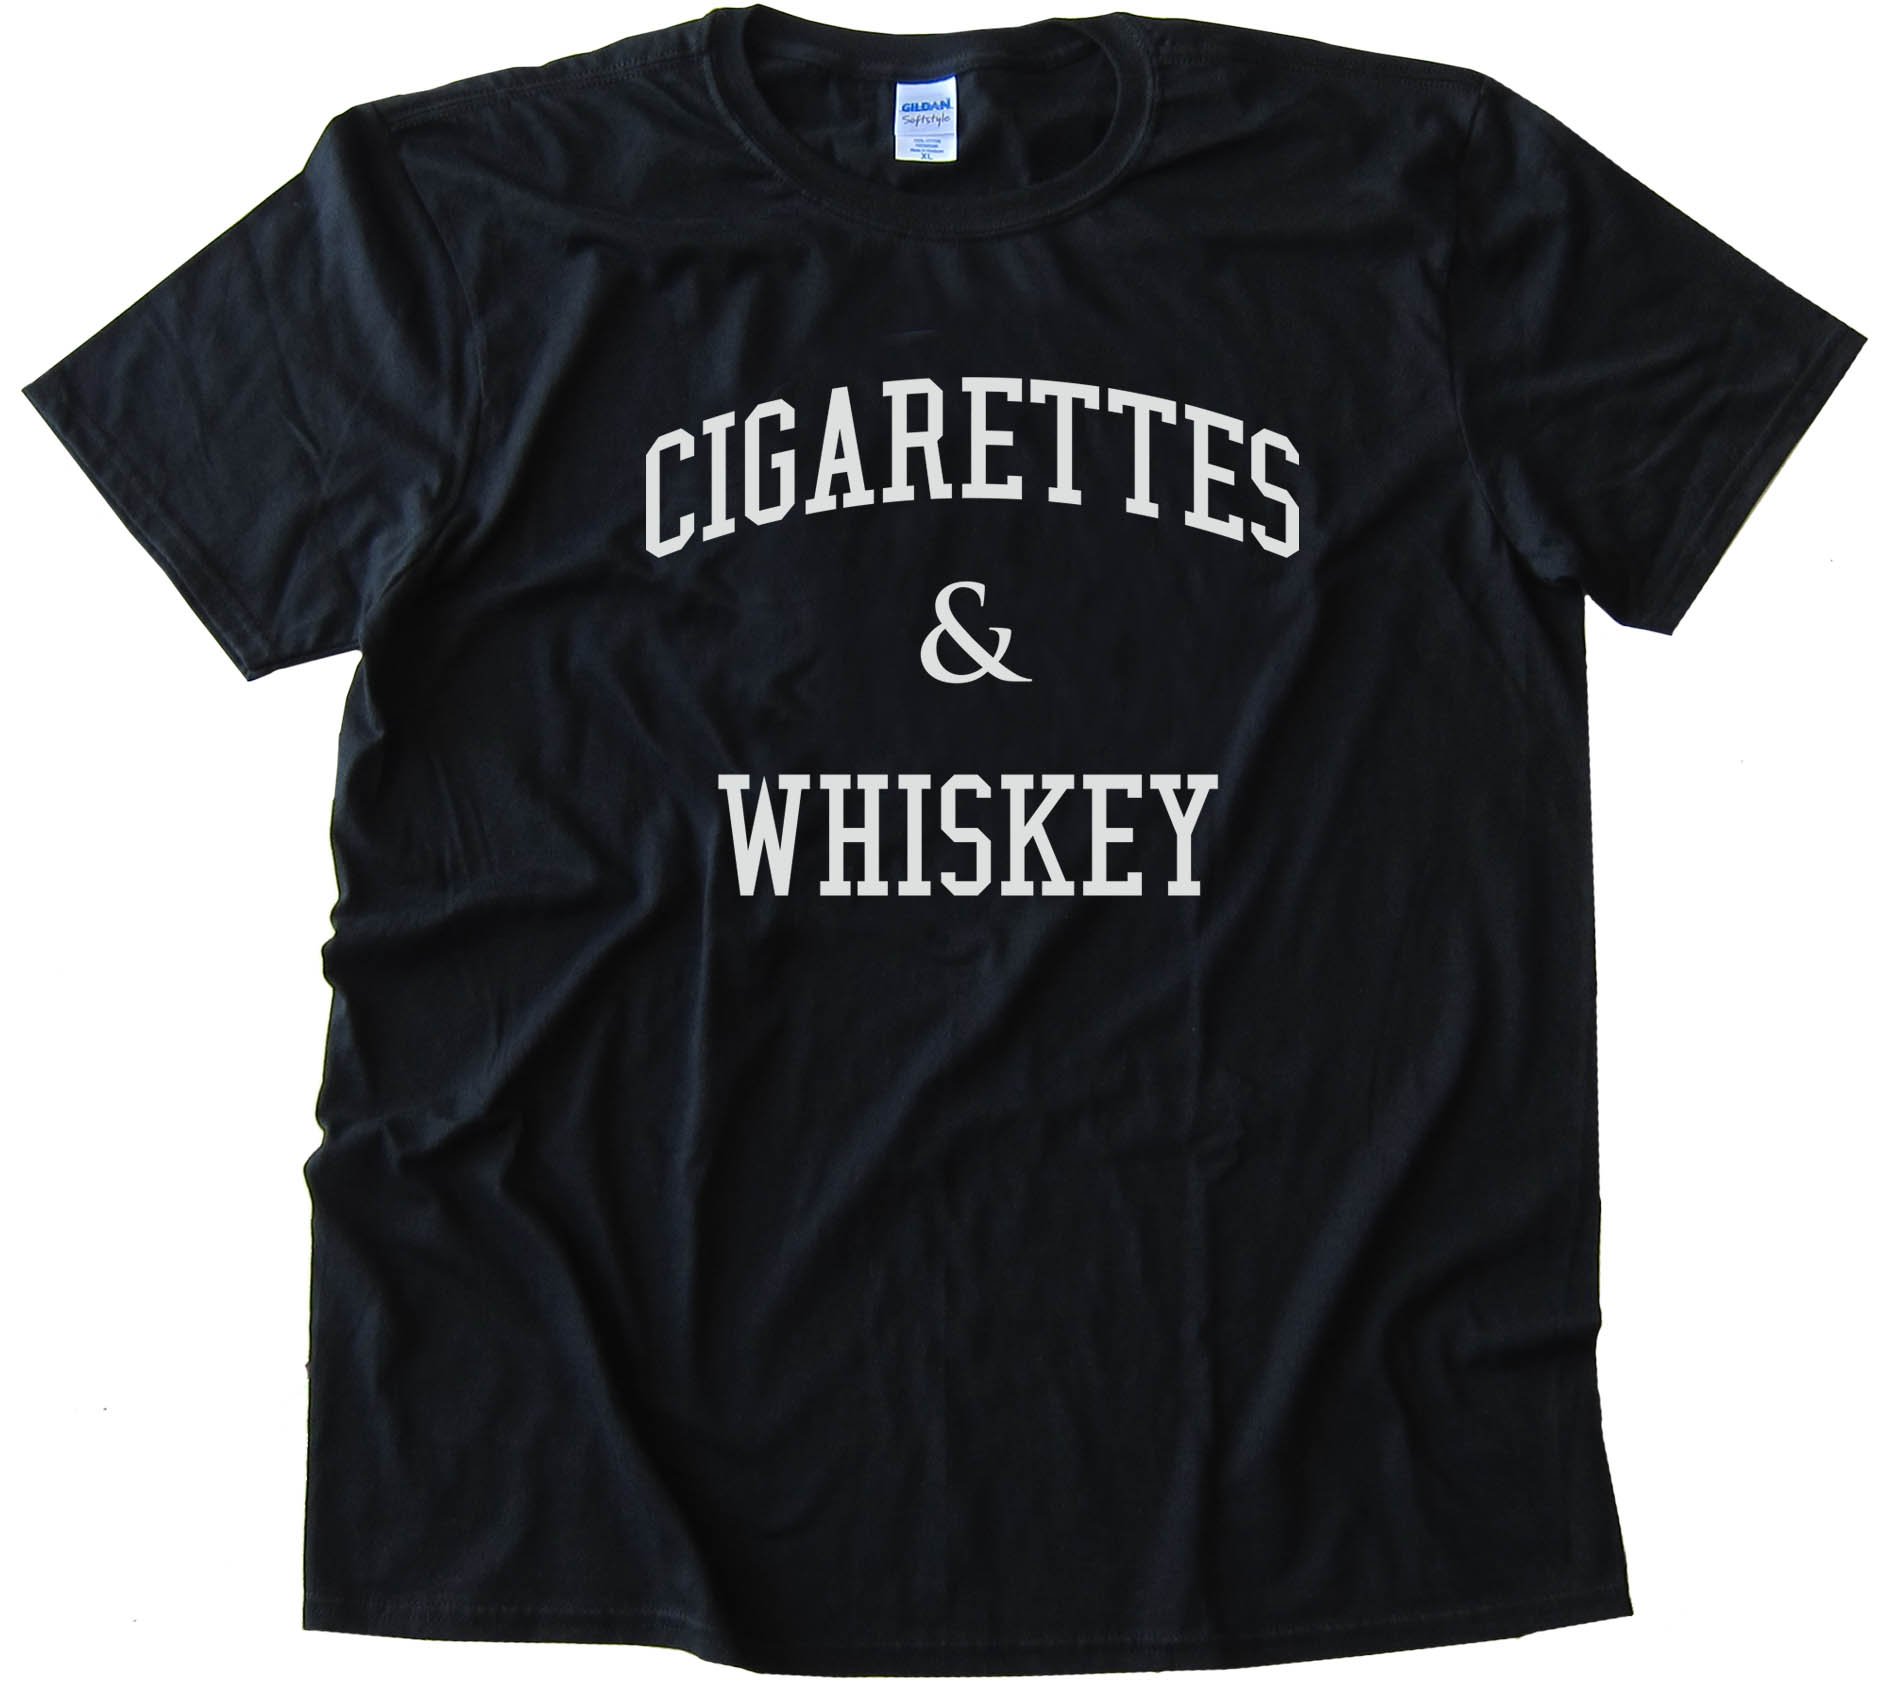 Cigarettes And Whiskey Partying - Tee Shirt